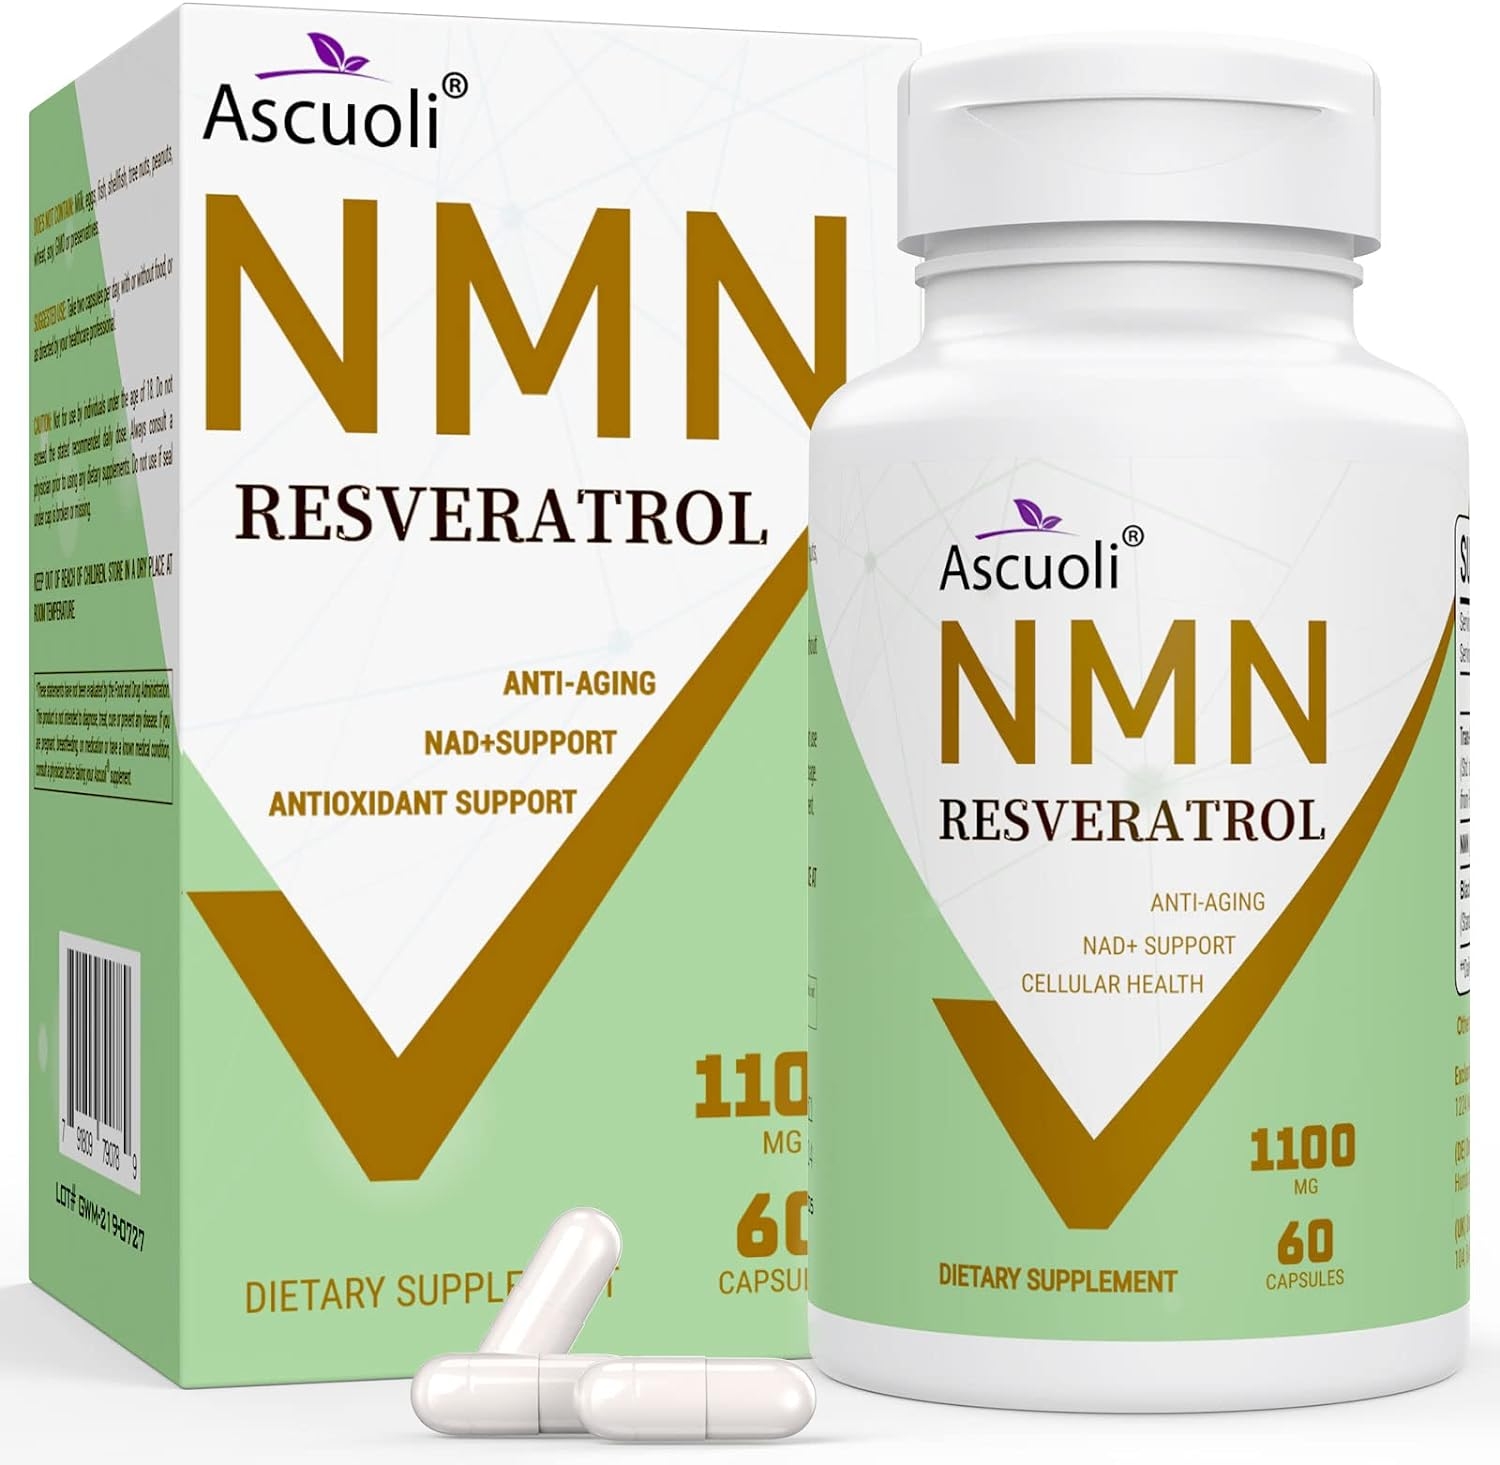 NMN + Trans-Resveratrol 99% Purity 1100mg Supplement, 3-IN -1 Advanced Formula 500mg NMN Nicotinamide Mononucleotide Boost NAD+, Anti-Aging, Powerful Antioxidant, Immune & Energy Support, 60 Capsules